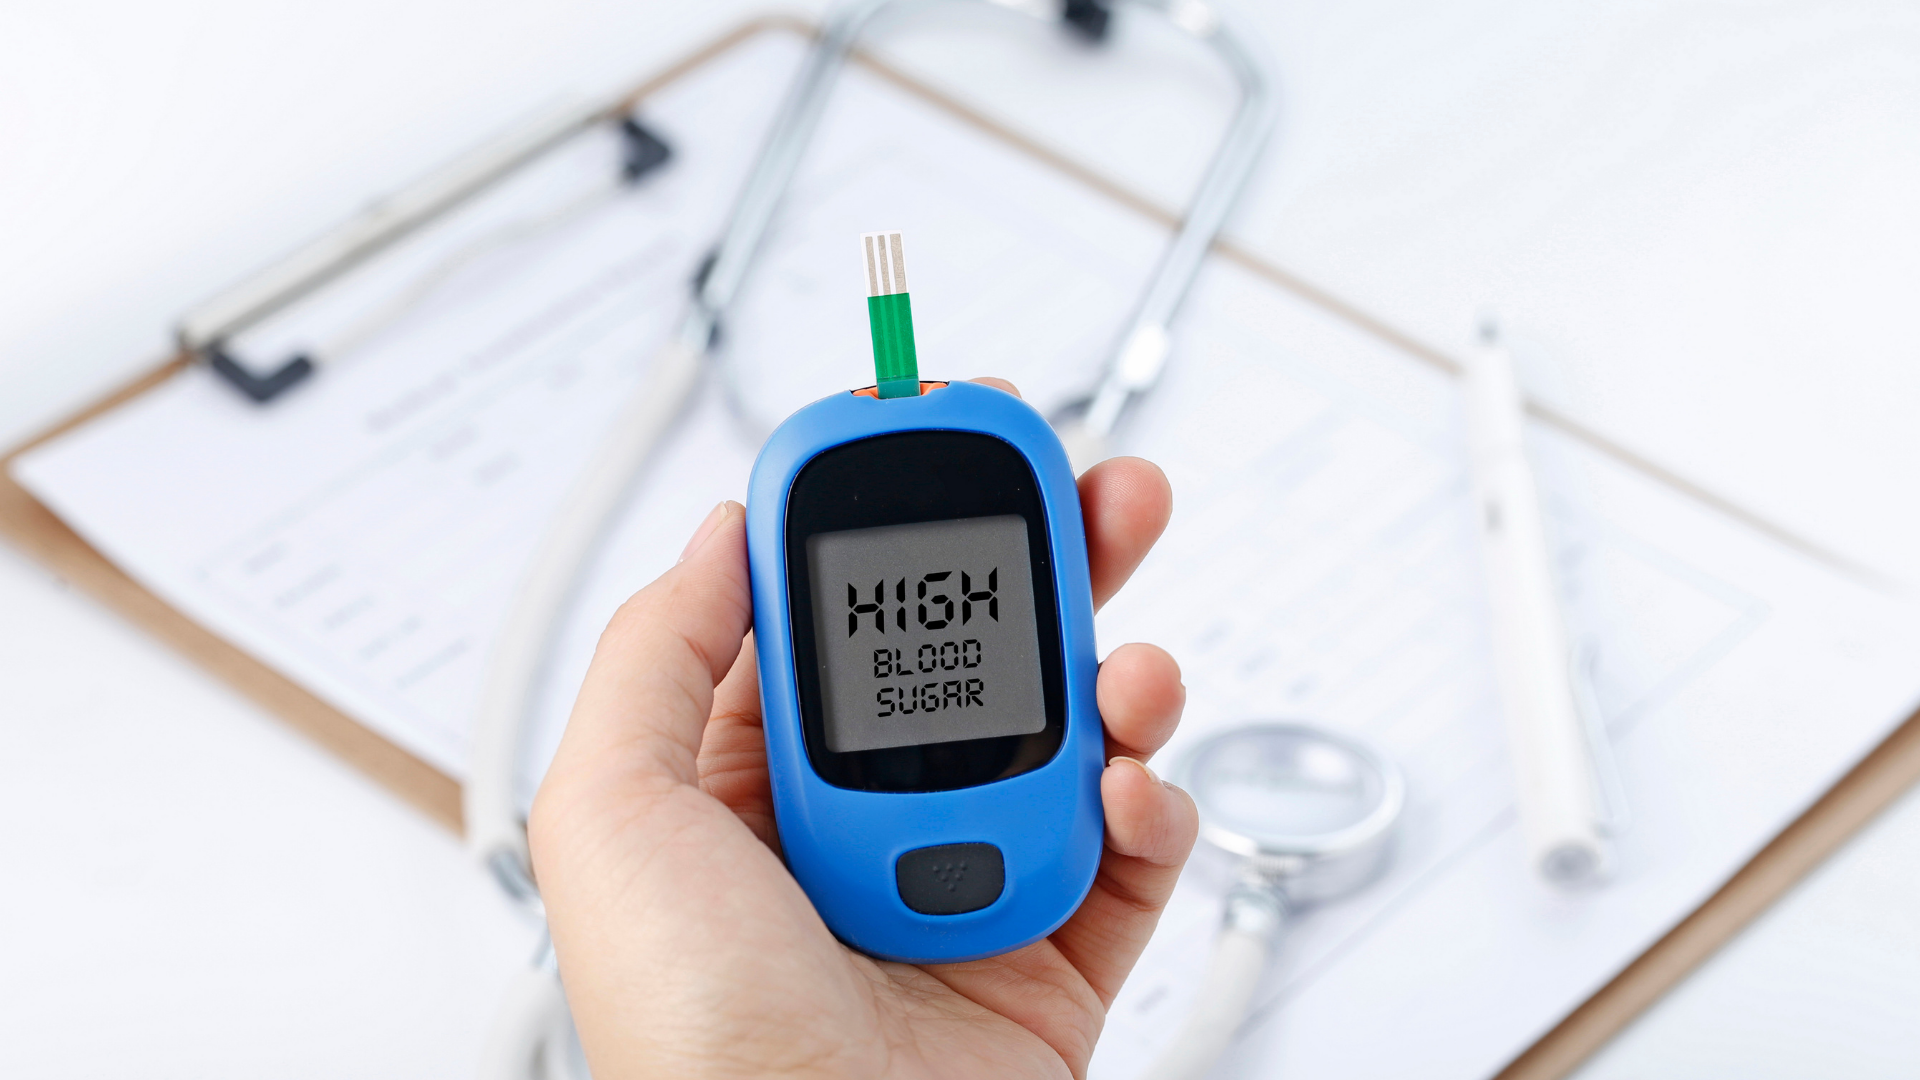 What are the benefits of CBD oil for diabetes?